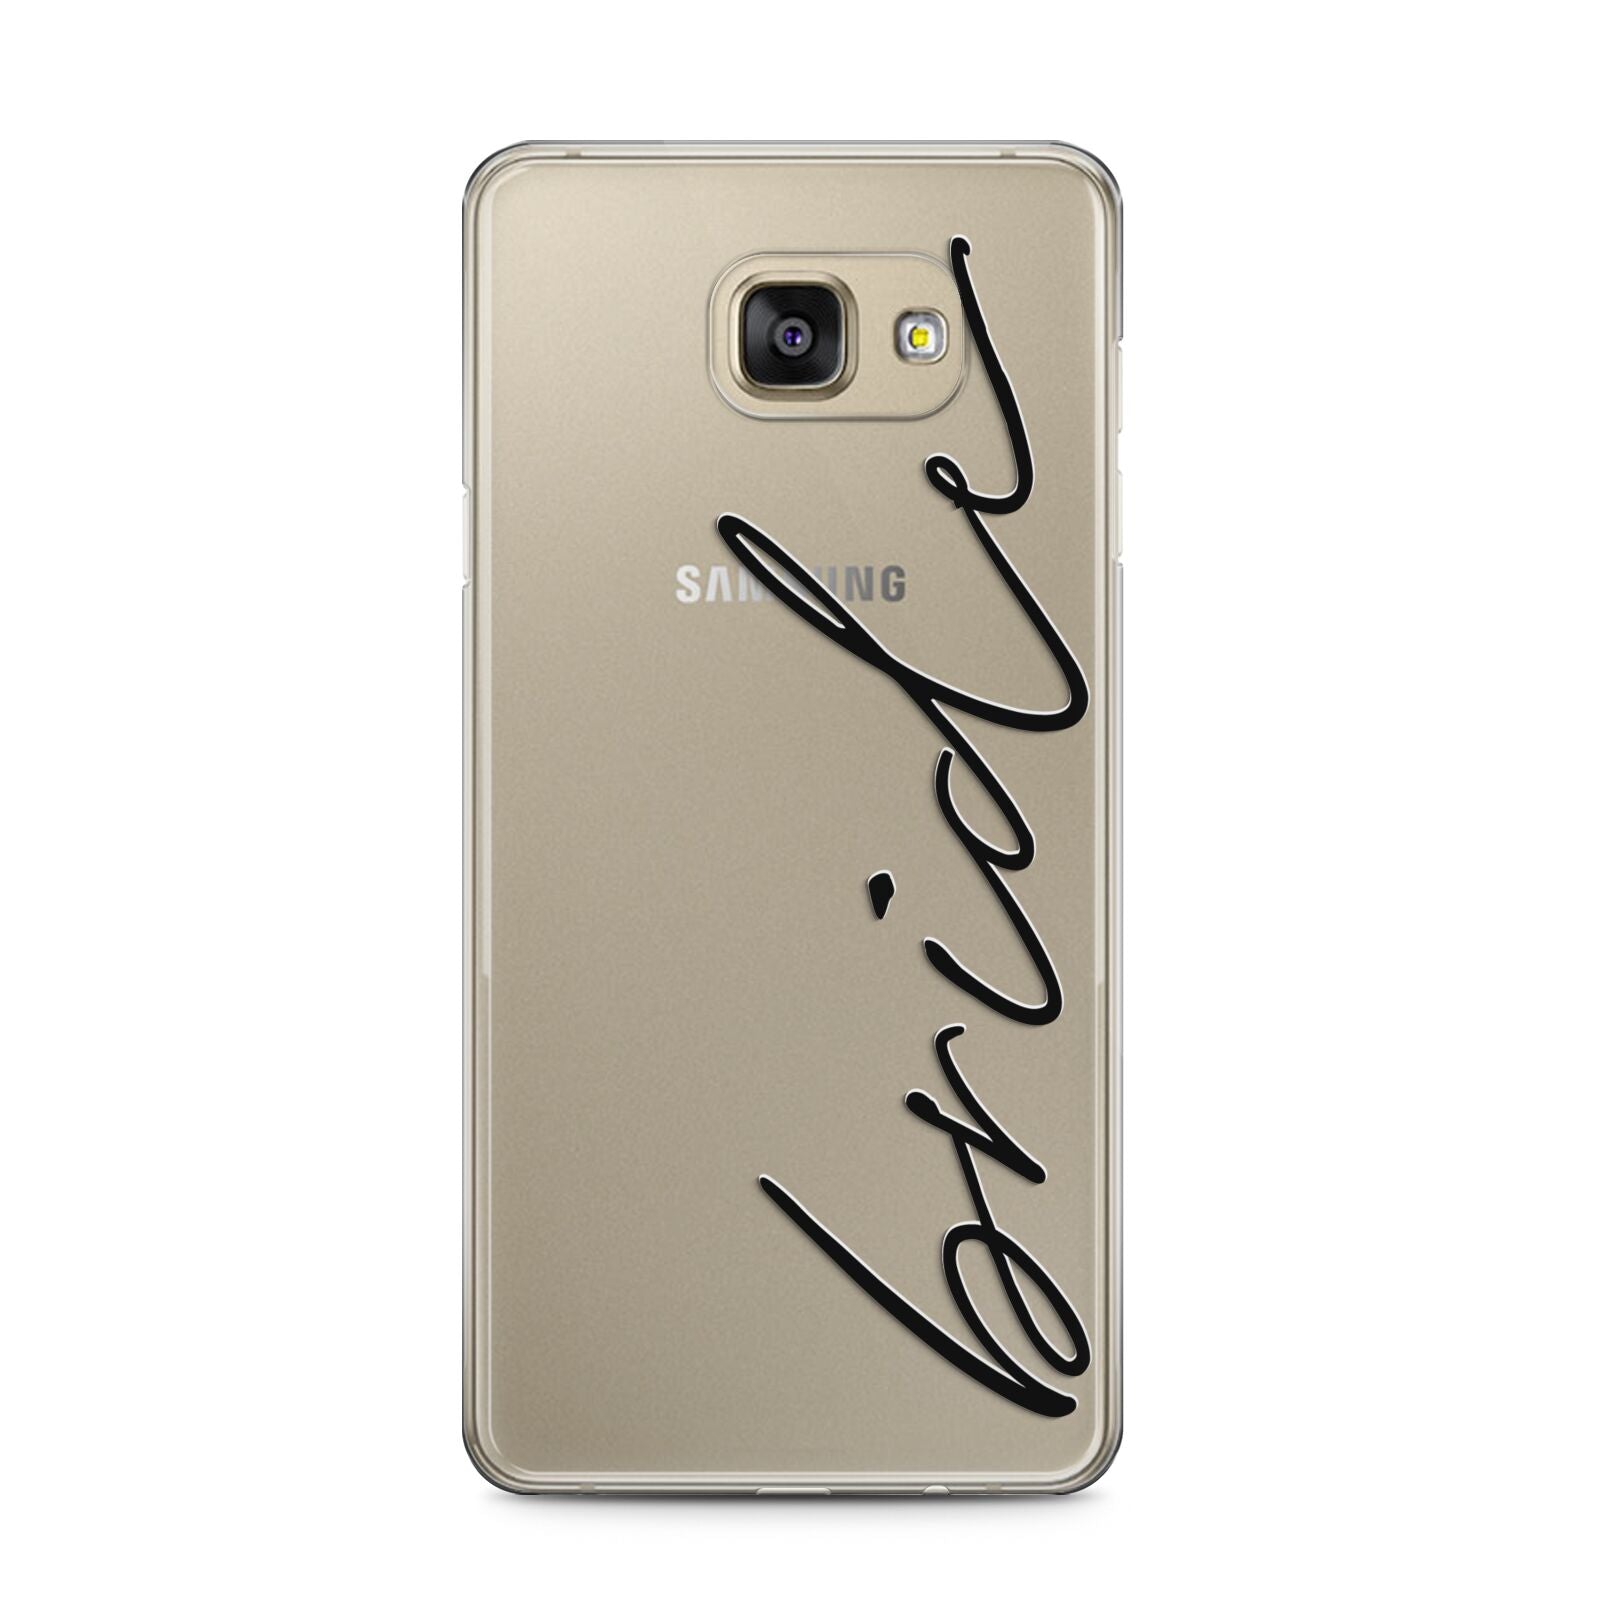 The Bride Samsung Galaxy A5 2016 Case on gold phone